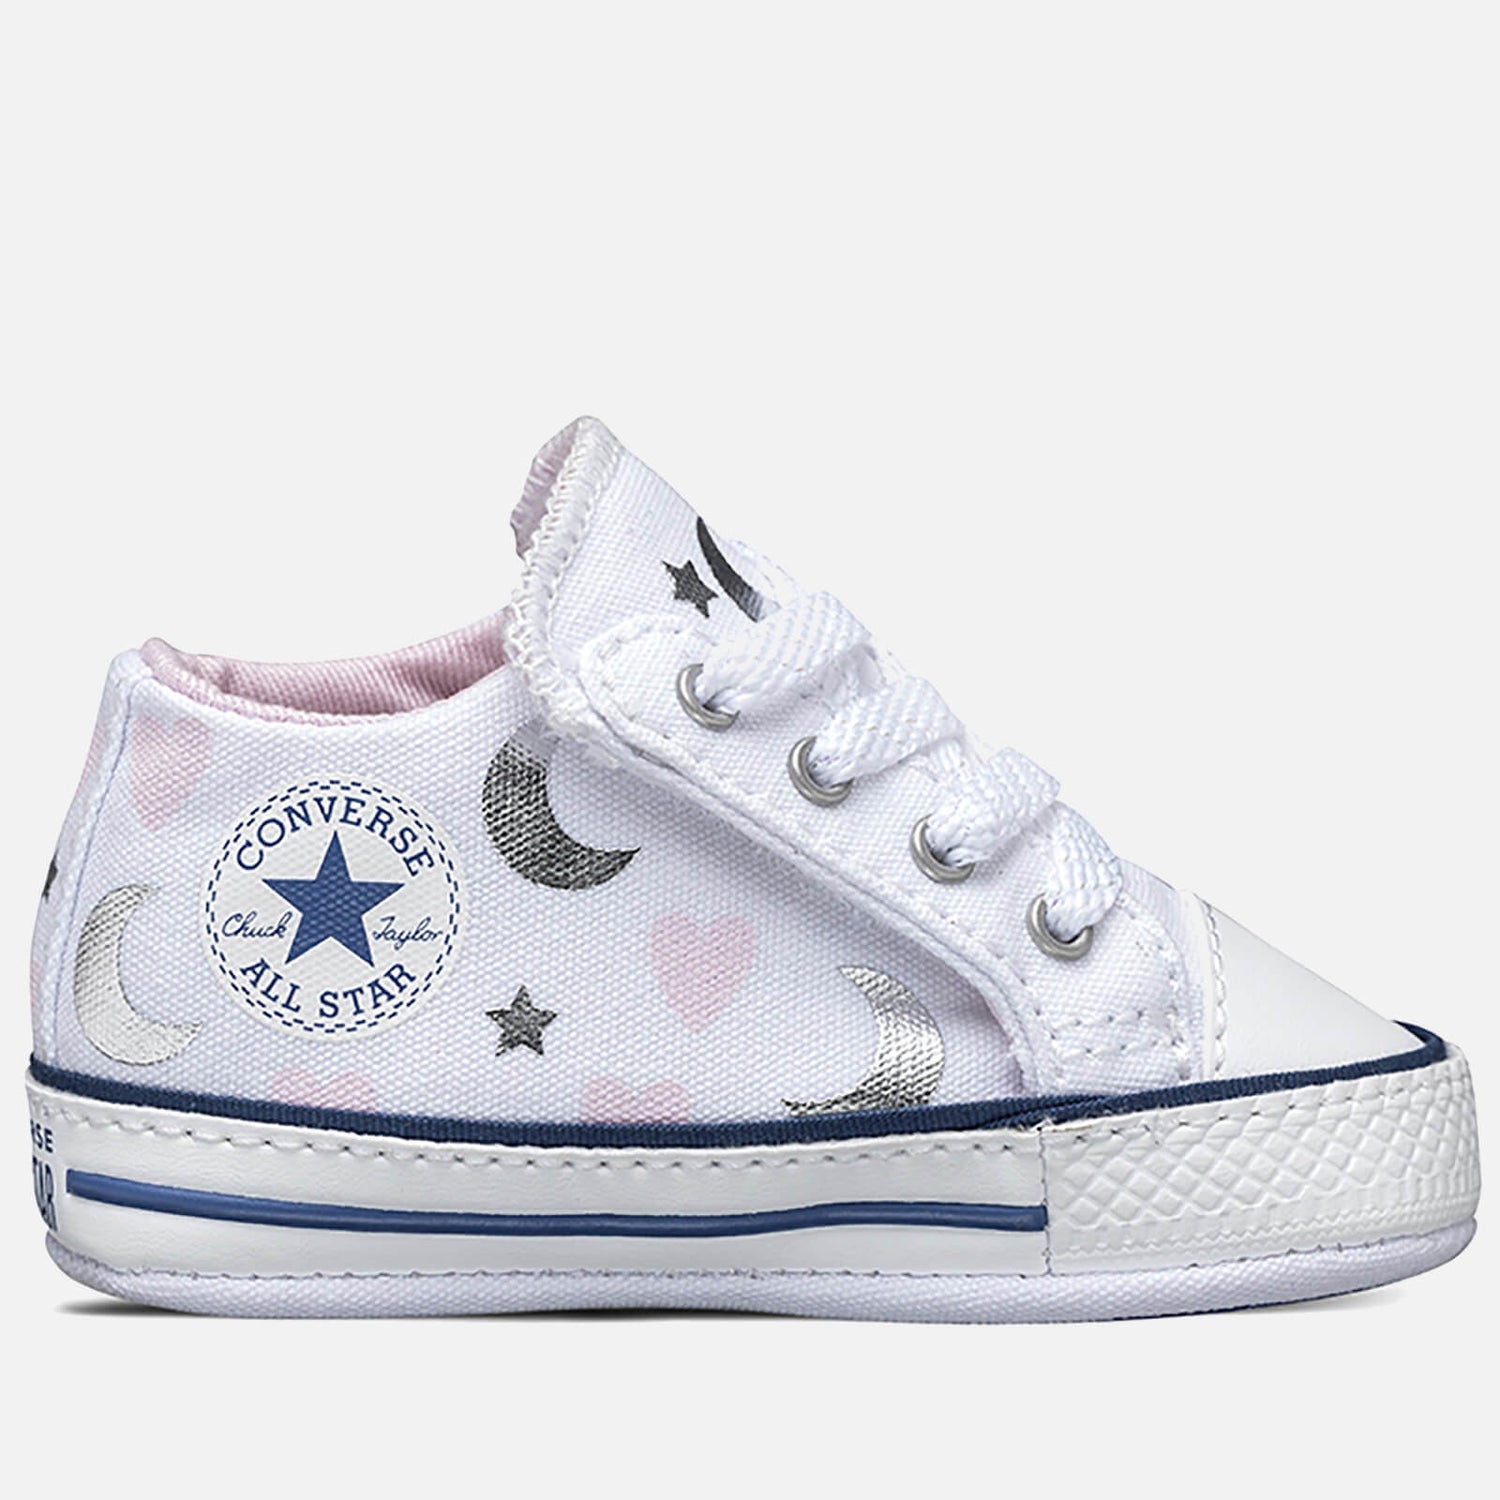 Converse Babies' Chuck Taylor All Star Cribster Soft Trainers - White/Pink/Silver